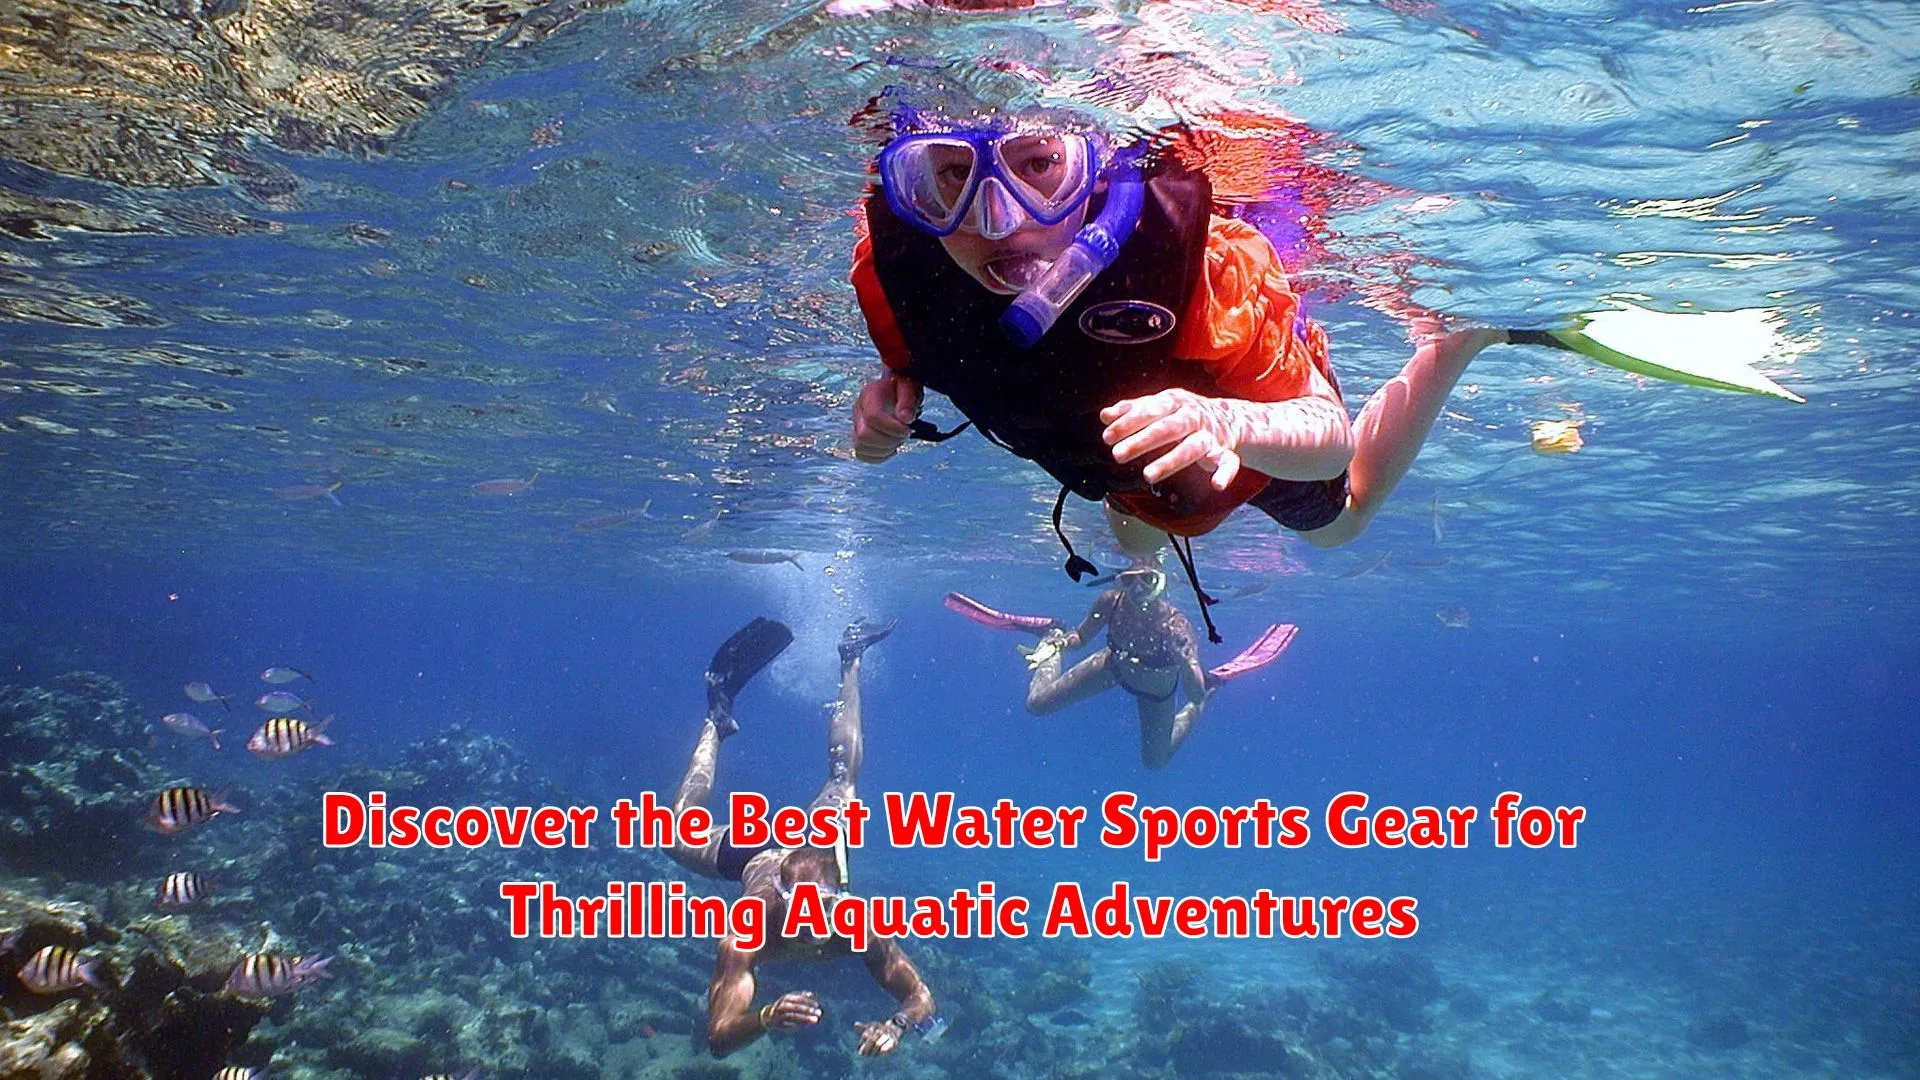 Discover the Best Water Sports Gear for Thrilling Aquatic Adventures